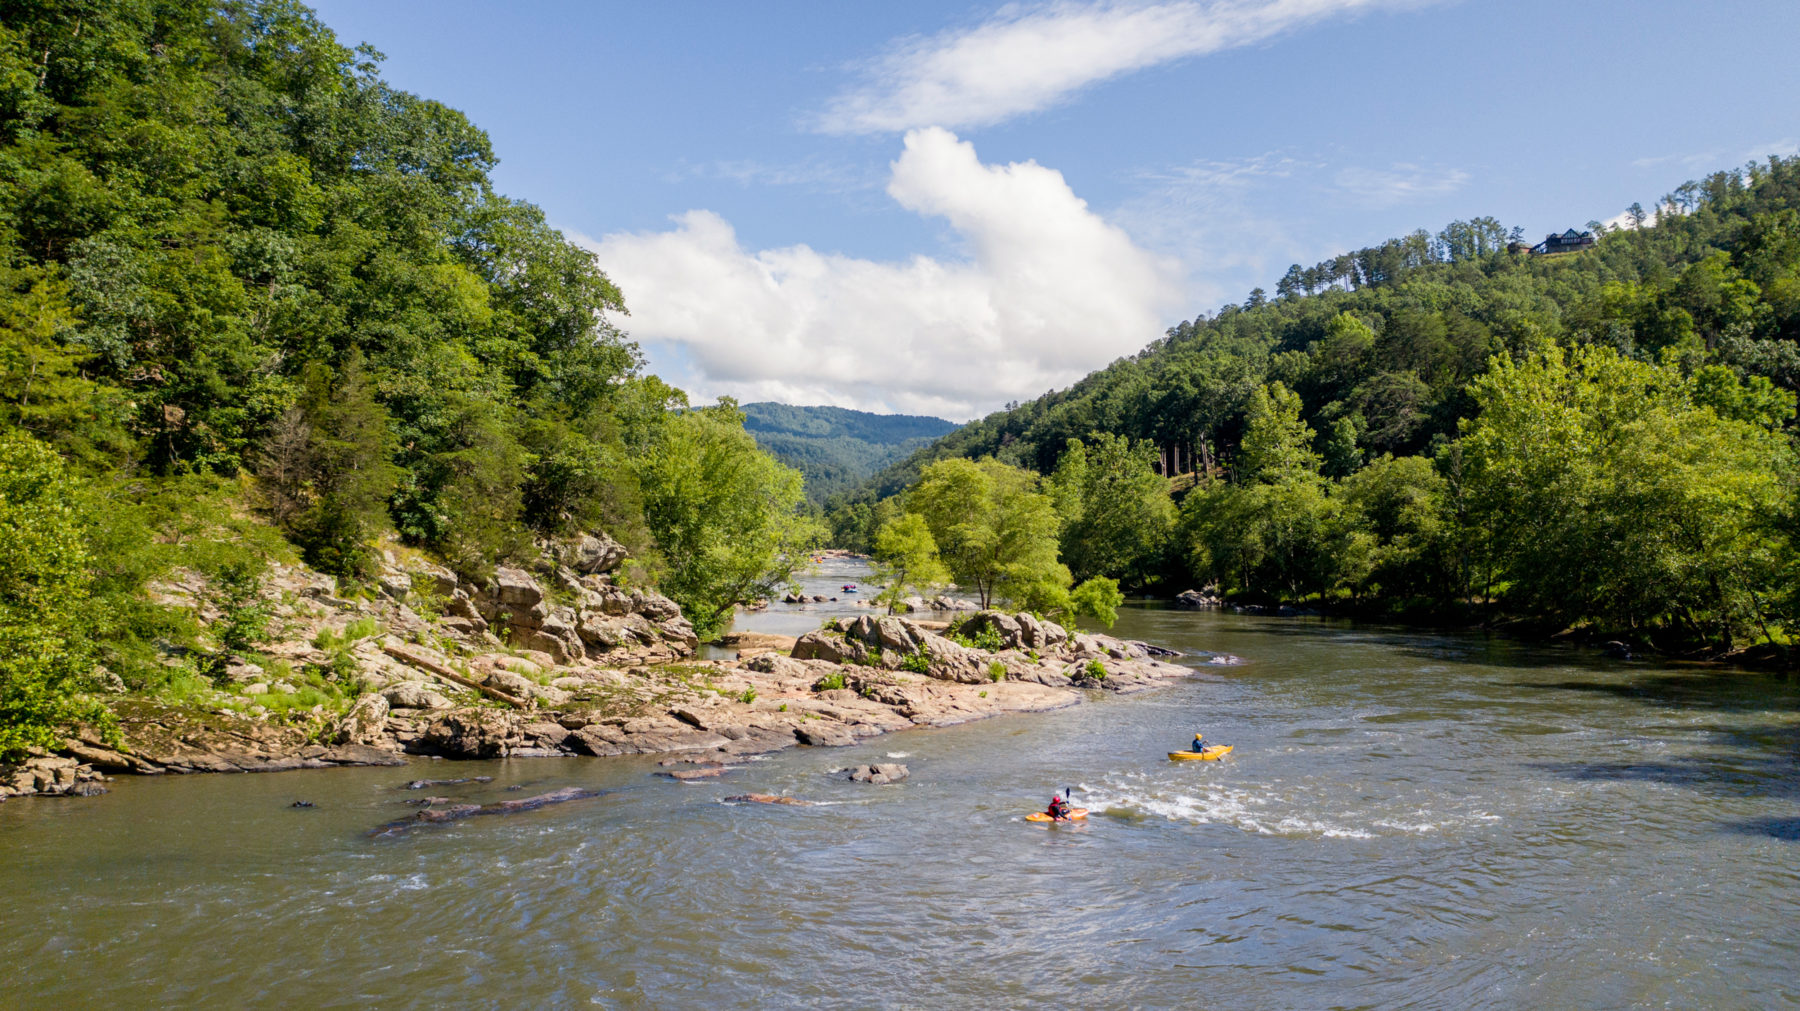 Kayakers paddling the French Broad River